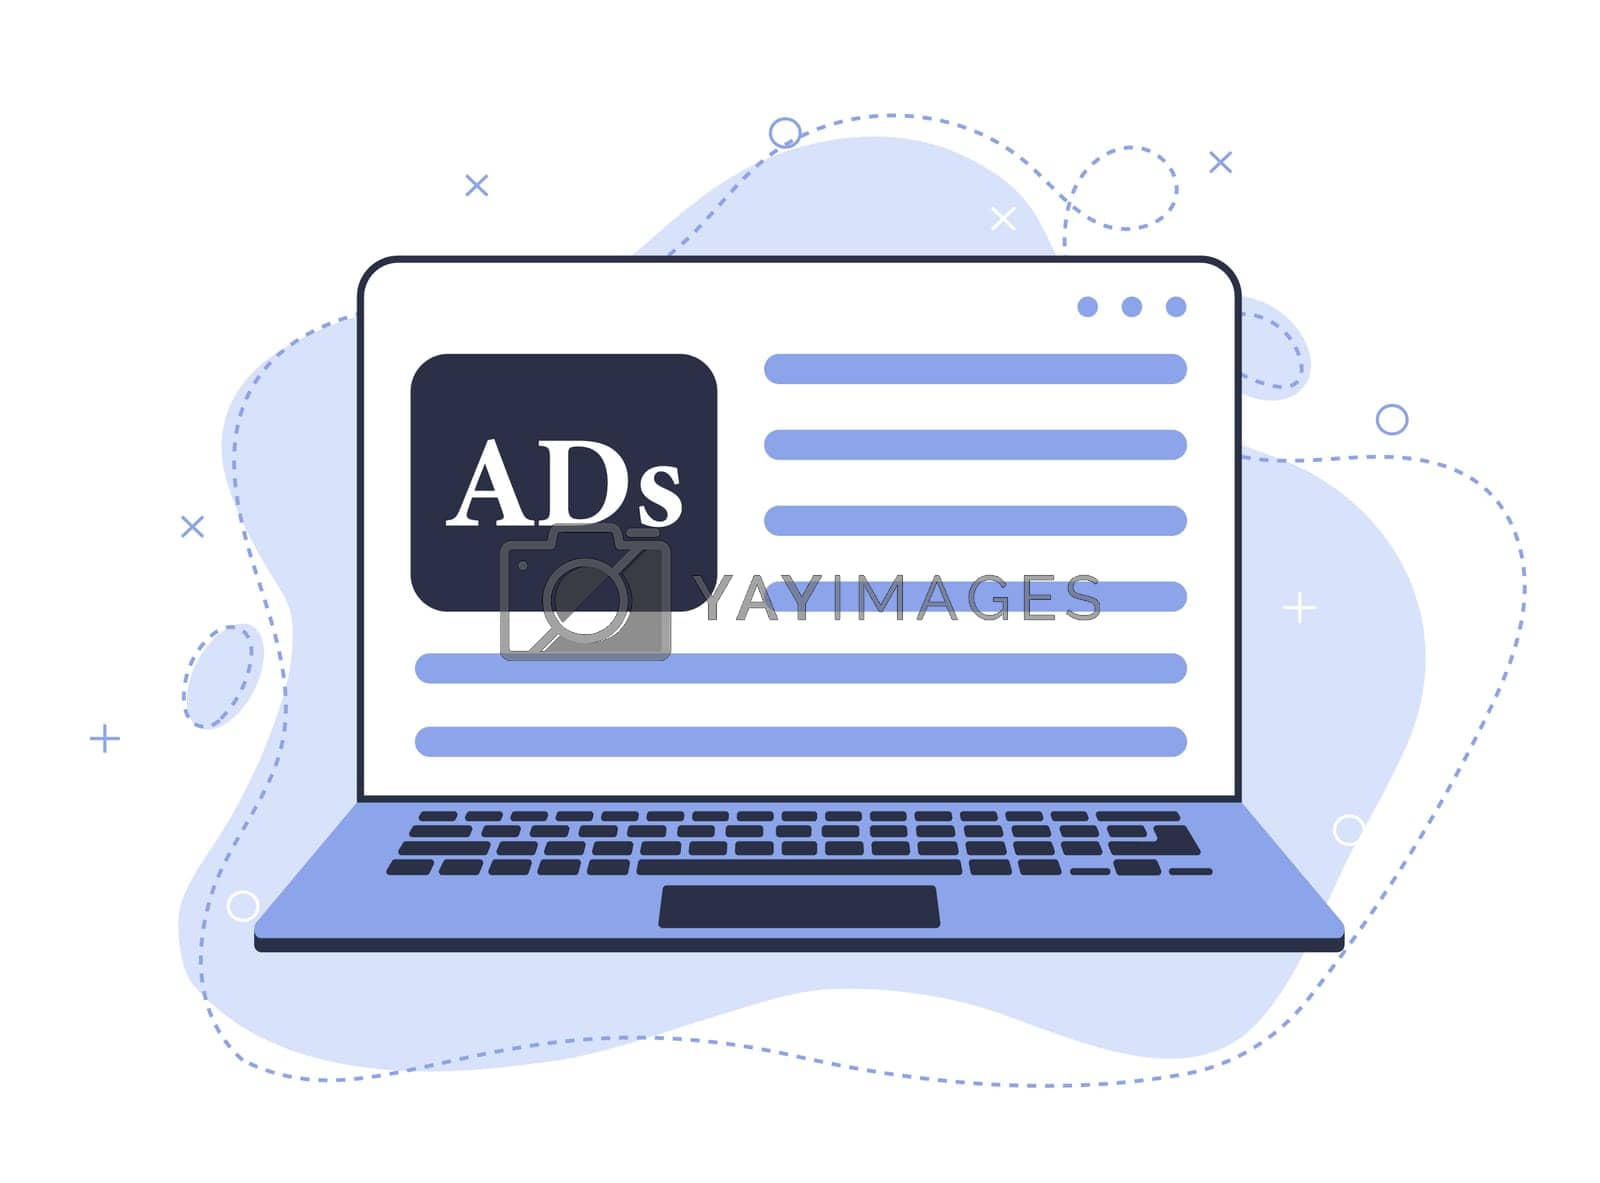 Royalty free image of Digital advertising, online ads showing on laptop, cross channel marketing, responsive ads, customer targeting with behavior tracking advertising by MakeVector